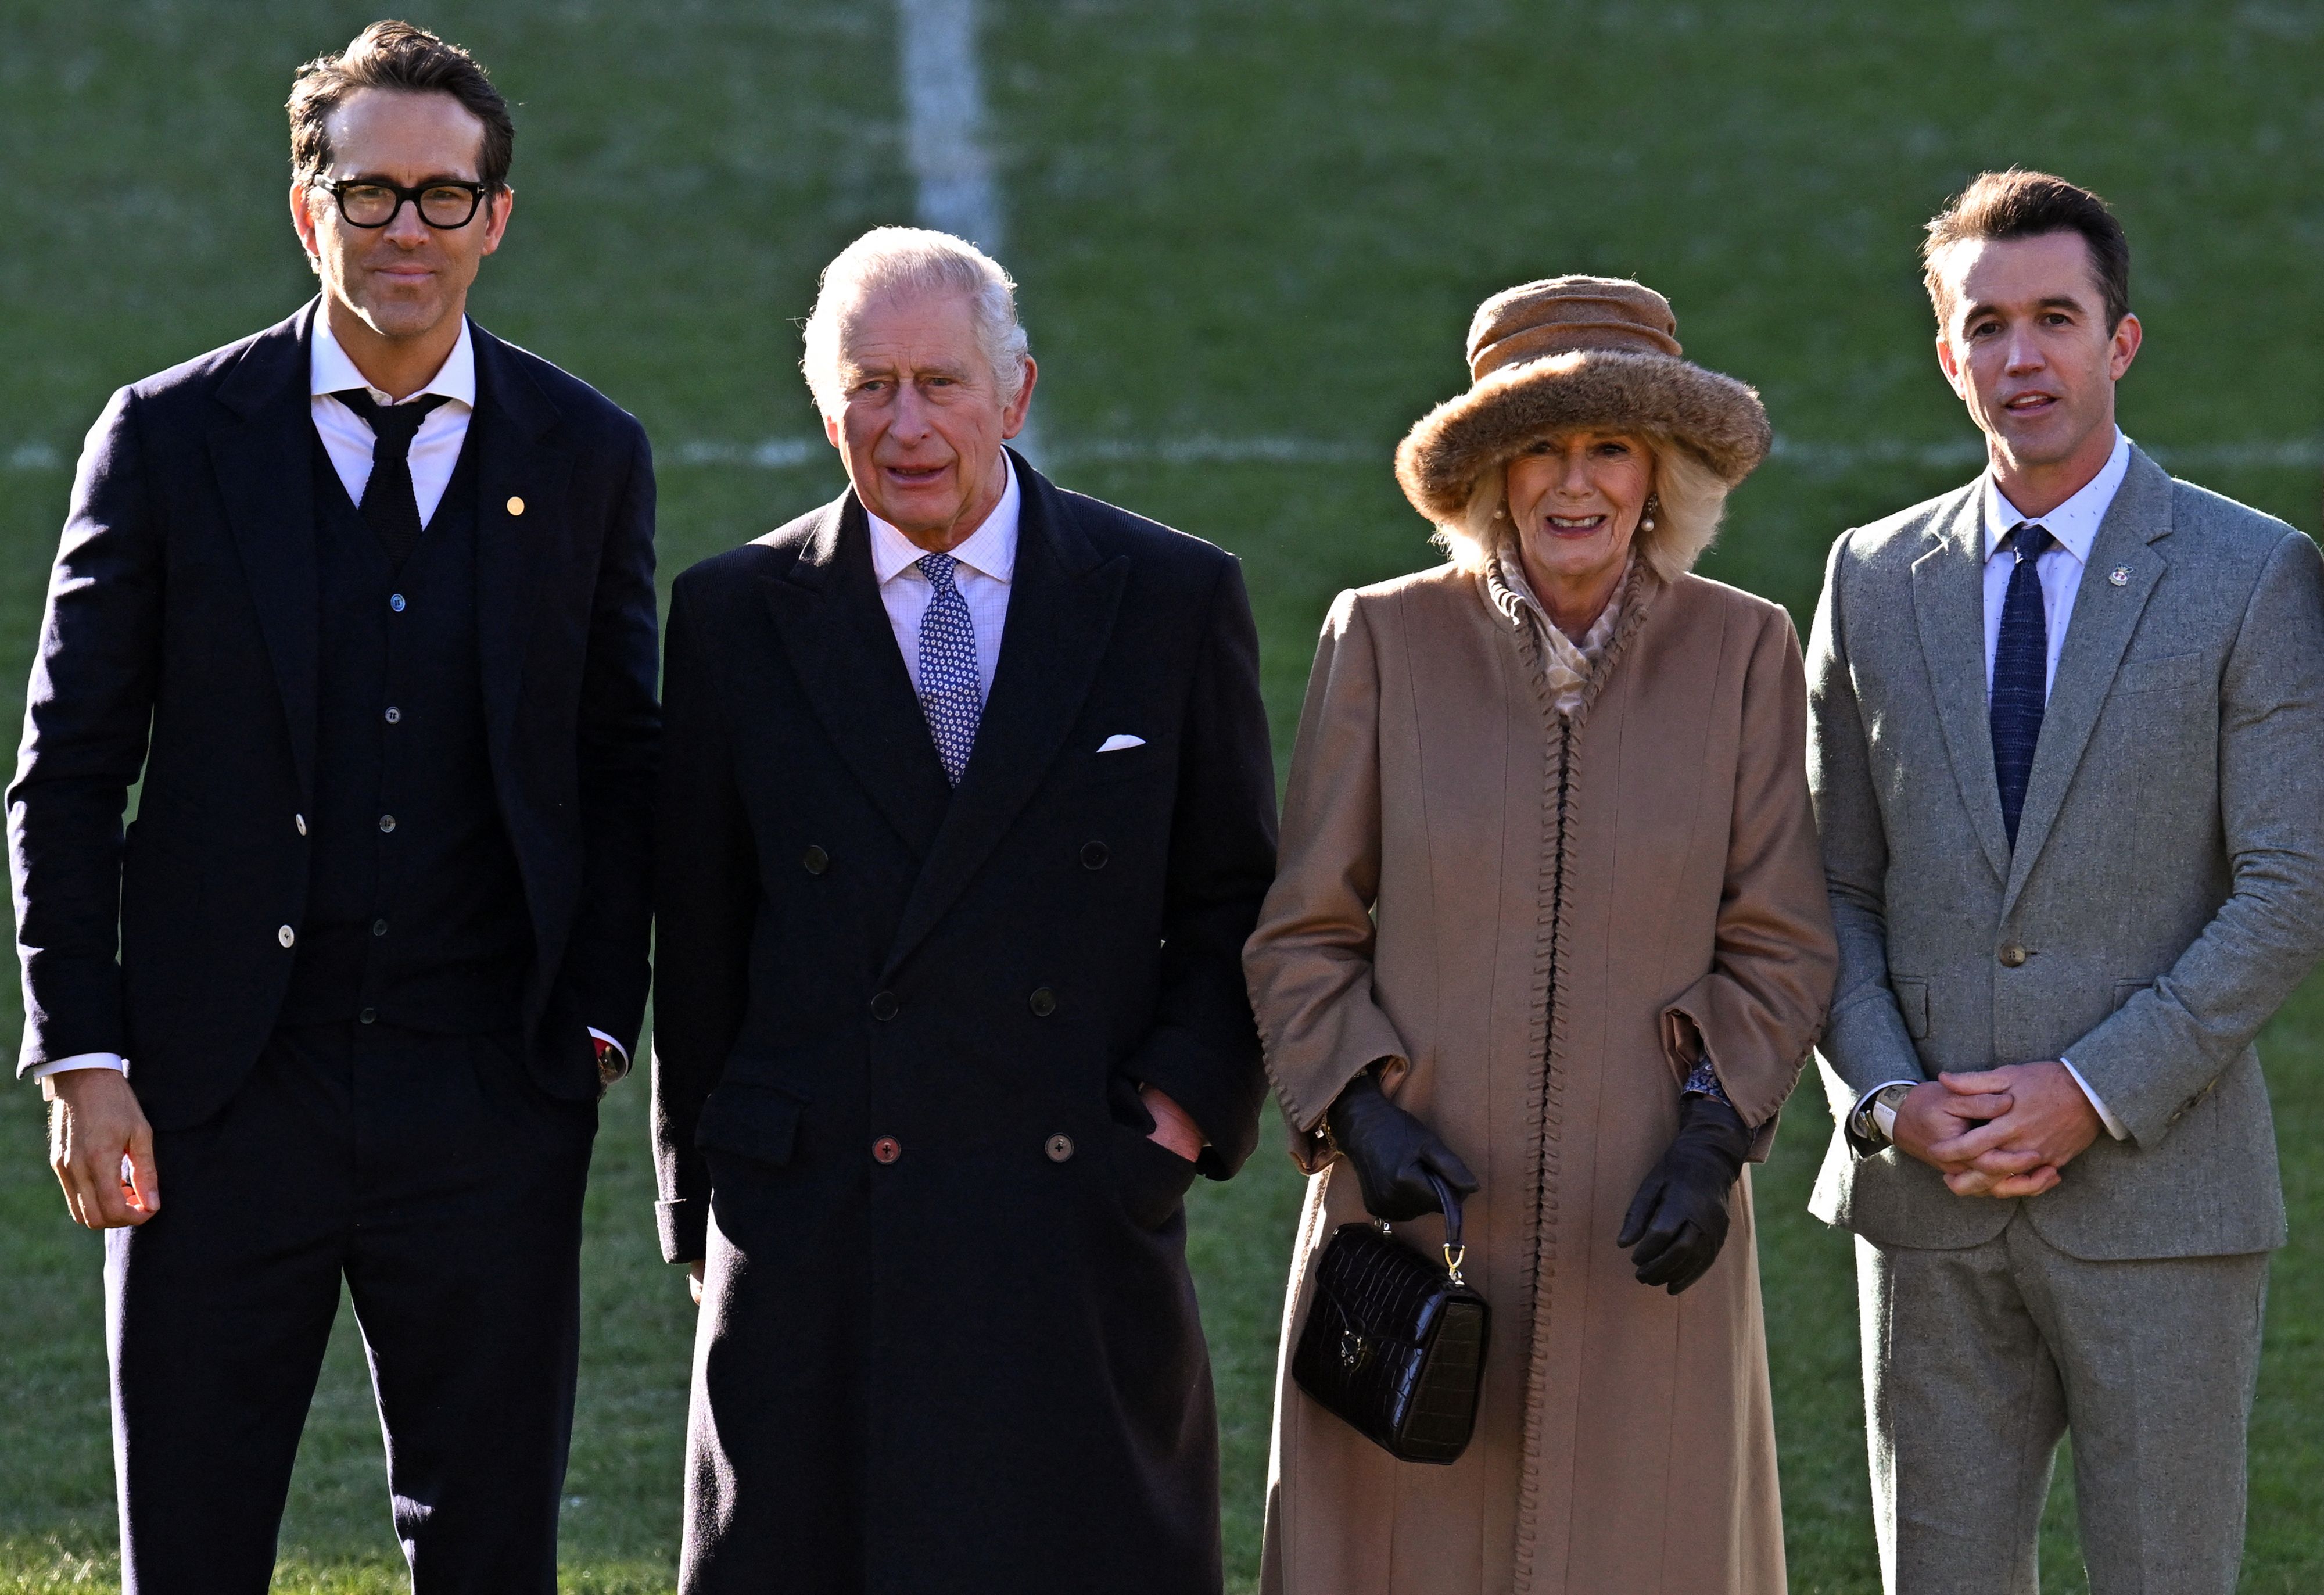 <p>King Charles III and his wife, Queen Consort Camilla, met American actors <a href="https://www.wonderwall.com/celebrity/profiles/overview/ryan-reynolds-390.article">Ryan Reynolds</a> and Rob McElhenney -- who are the co-chairmen of the professional soccer team Wrexham AFC -- during a visit to the Wrexham Association Football Club's Racecourse Ground on Dec. 9, 2022, to learn about the redevelopment of the club as part of their royal visit to Wrexham, Wales. Ryan posted a pic of himself with the king on Instagram and referenced his Wrexham documentary series, cheekily captioning his post, "Welcome to Wrexham Season 2: Charles in Charge."</p>